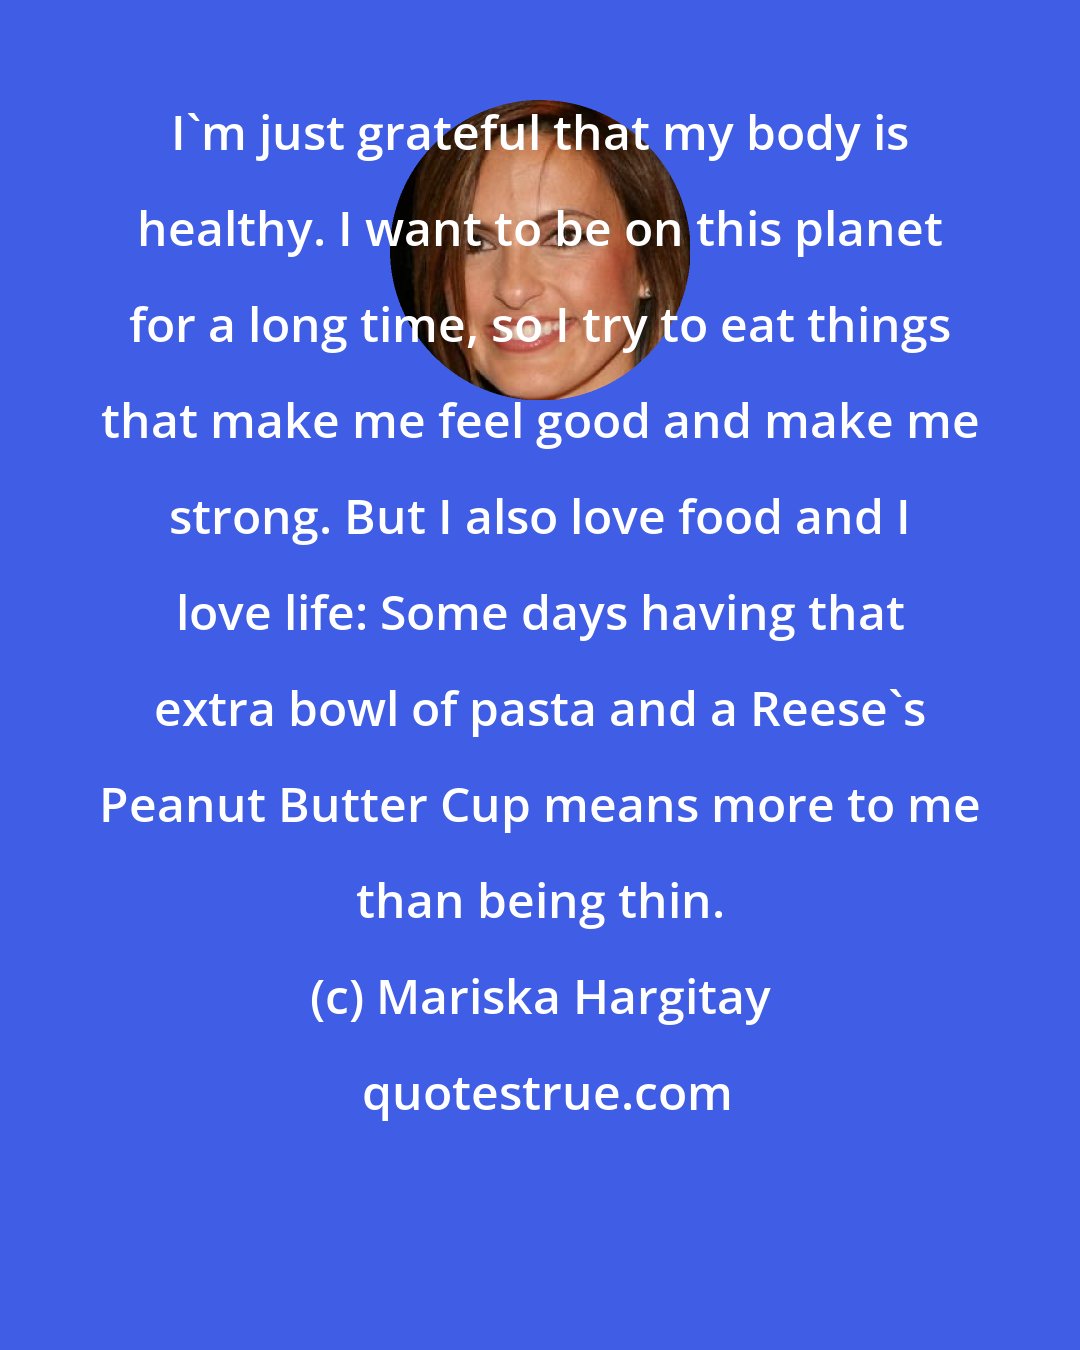 Mariska Hargitay: I'm just grateful that my body is healthy. I want to be on this planet for a long time, so I try to eat things that make me feel good and make me strong. But I also love food and I love life: Some days having that extra bowl of pasta and a Reese's Peanut Butter Cup means more to me than being thin.